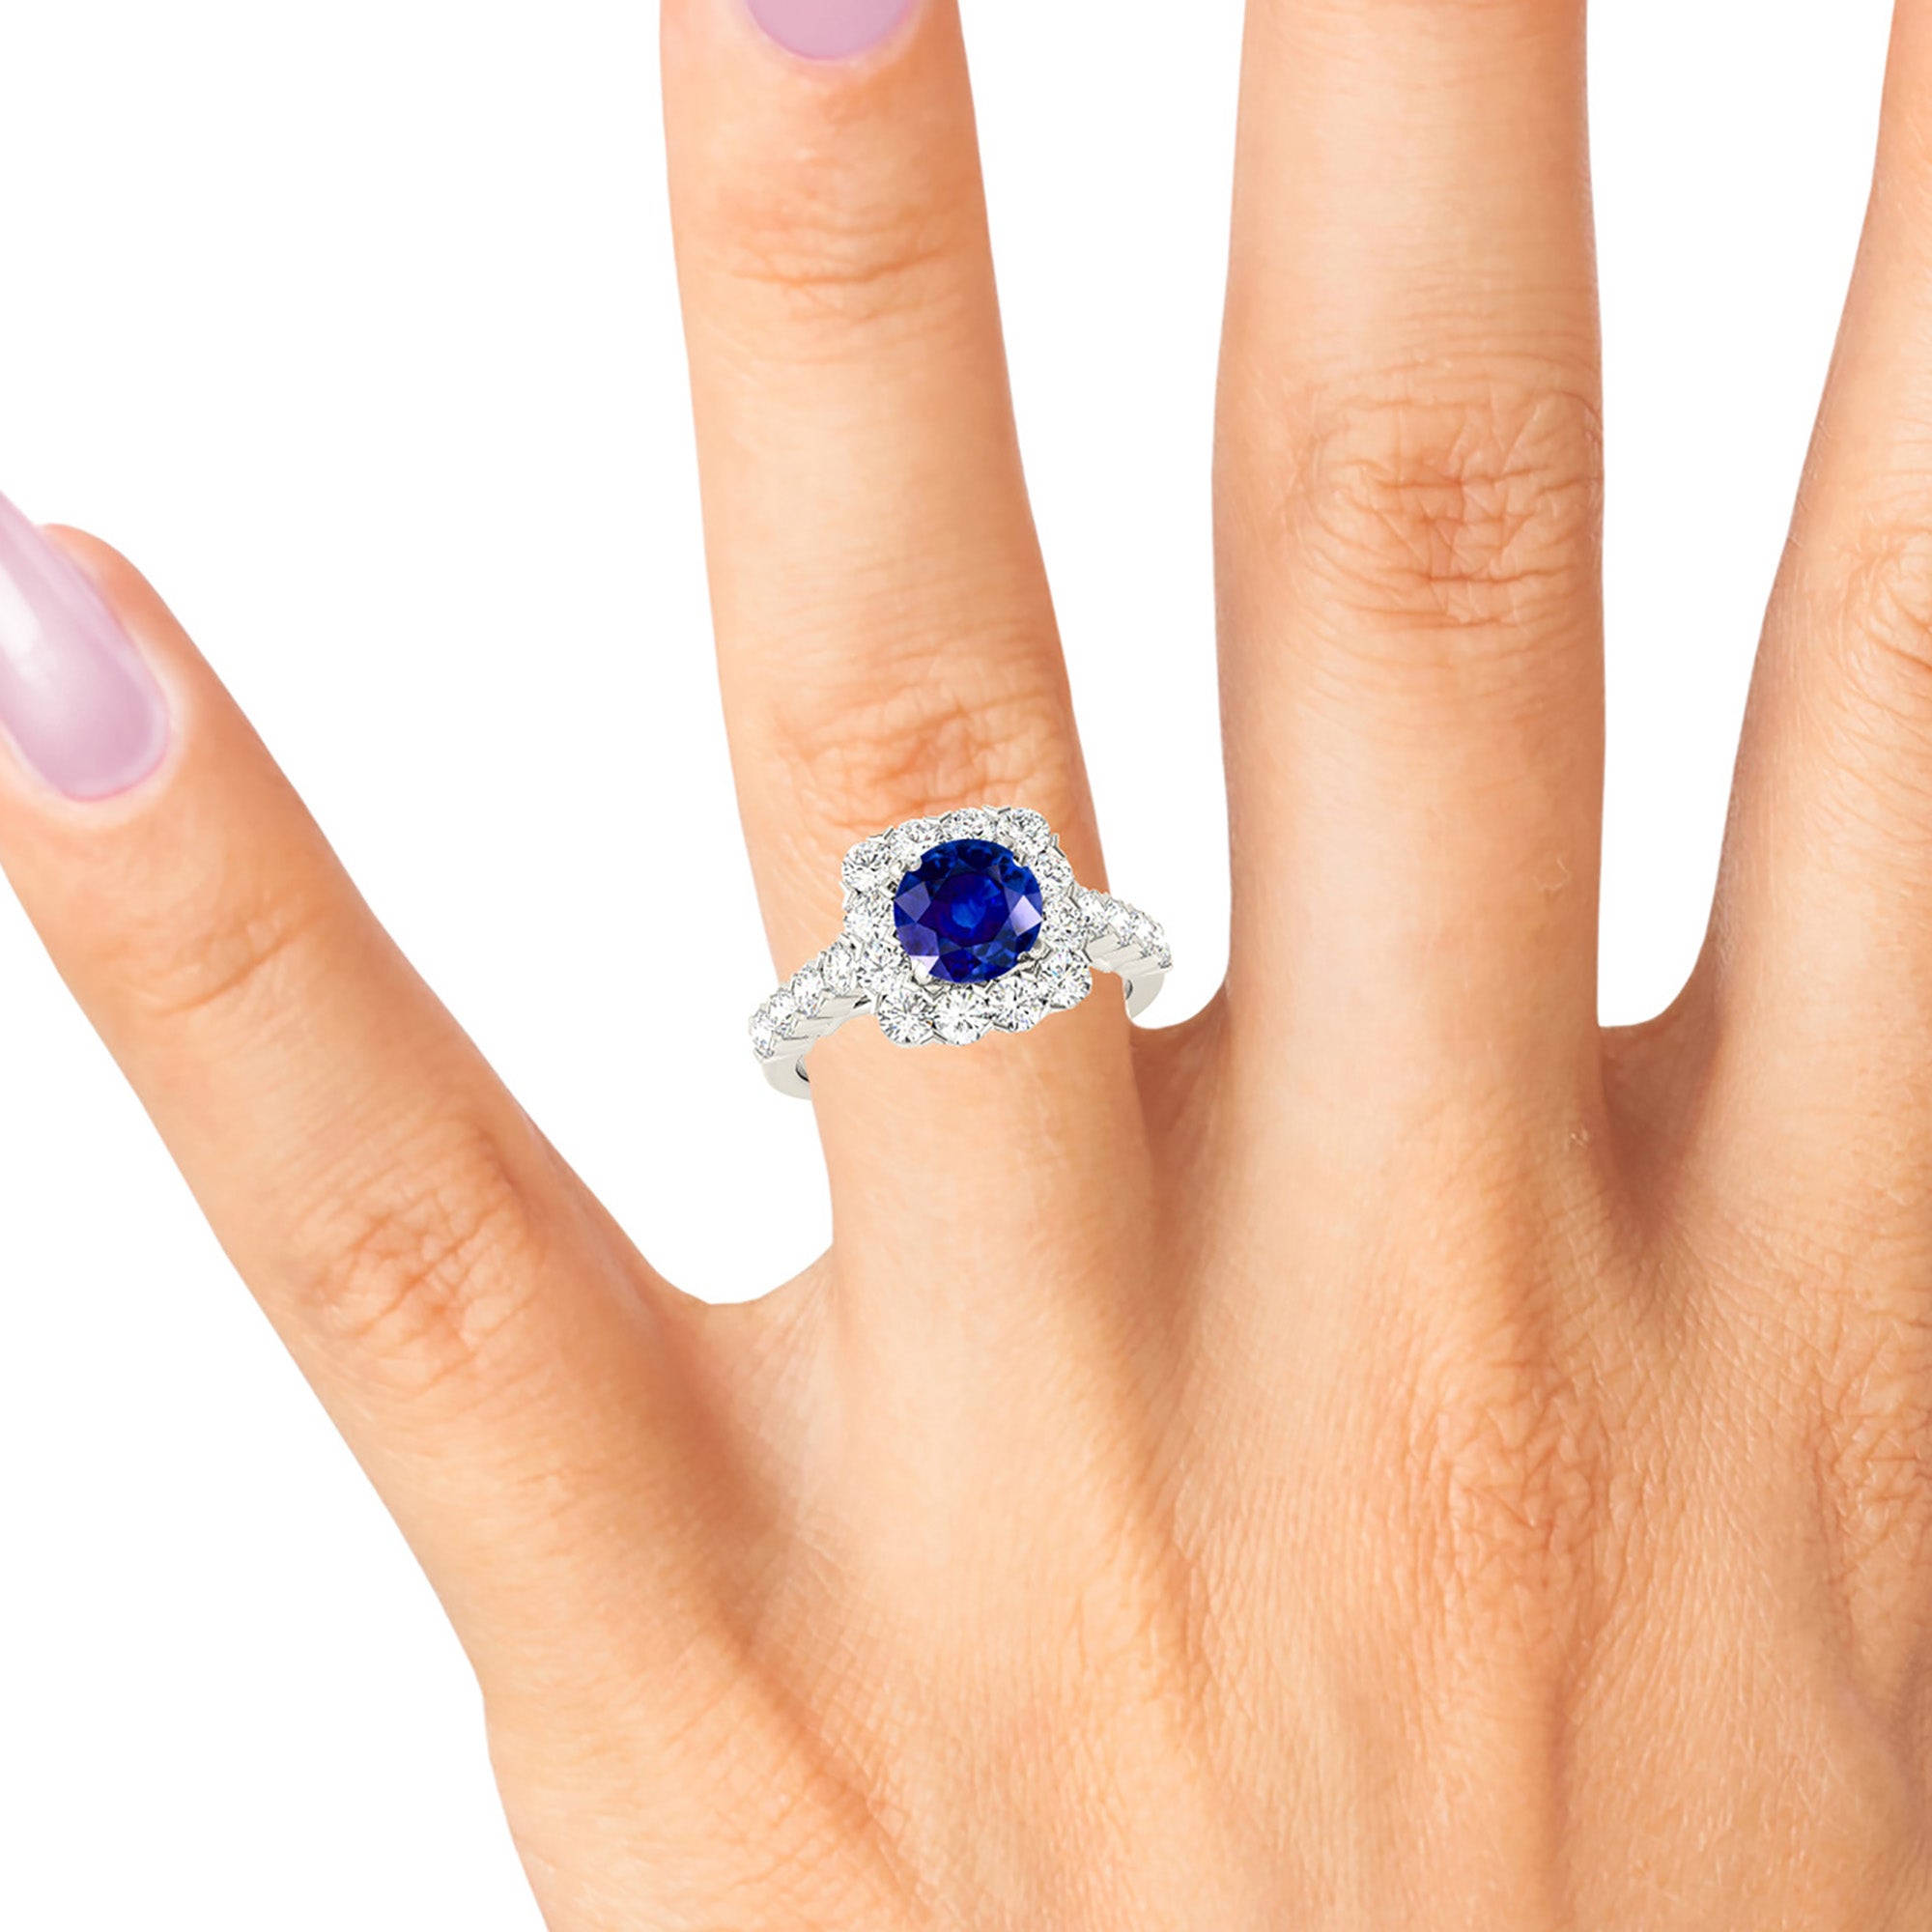 2.41 ct. Genuine Blue Sapphire Halo Ring with 1.35 ctw. Side Diamonds-in 14K/18K White, Yellow, Rose Gold and Platinum - Christmas Jewelry Gift -VIRABYANI